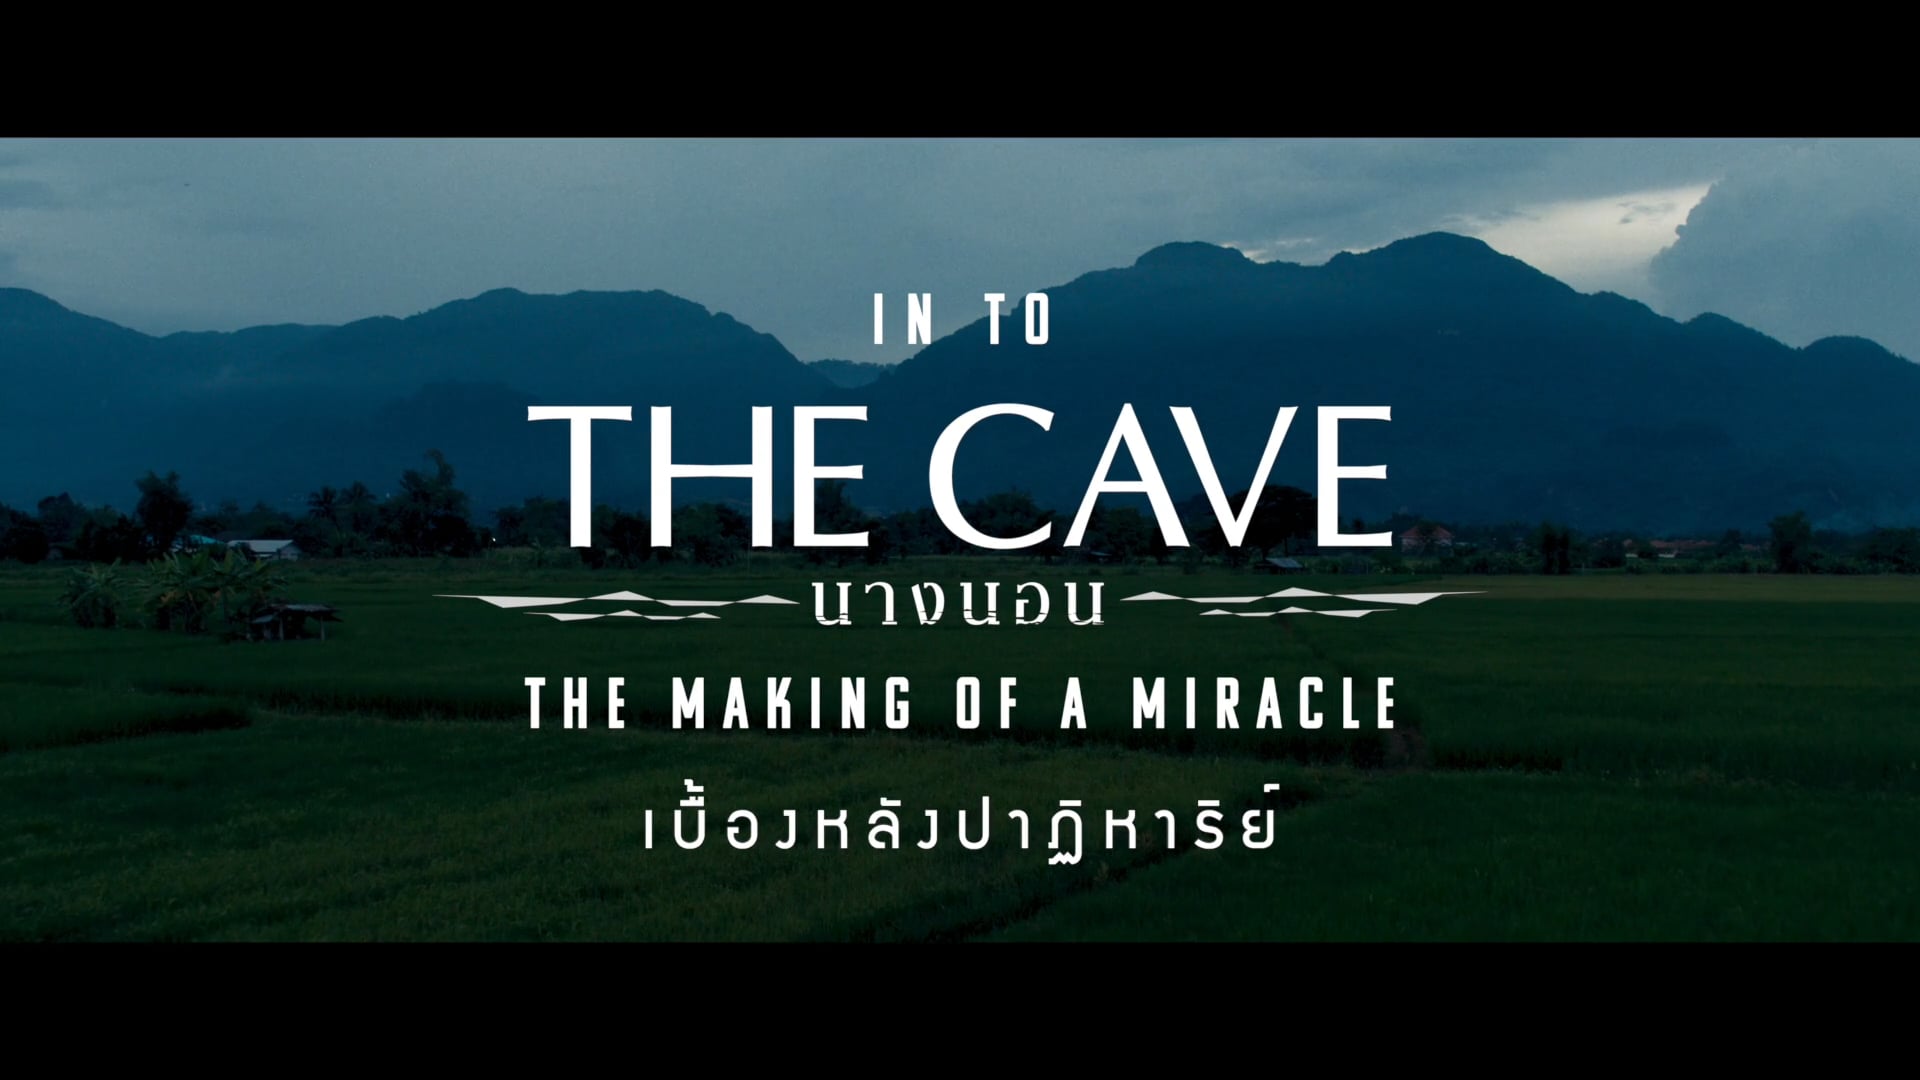 Into The Cave: The Making of a Miracle